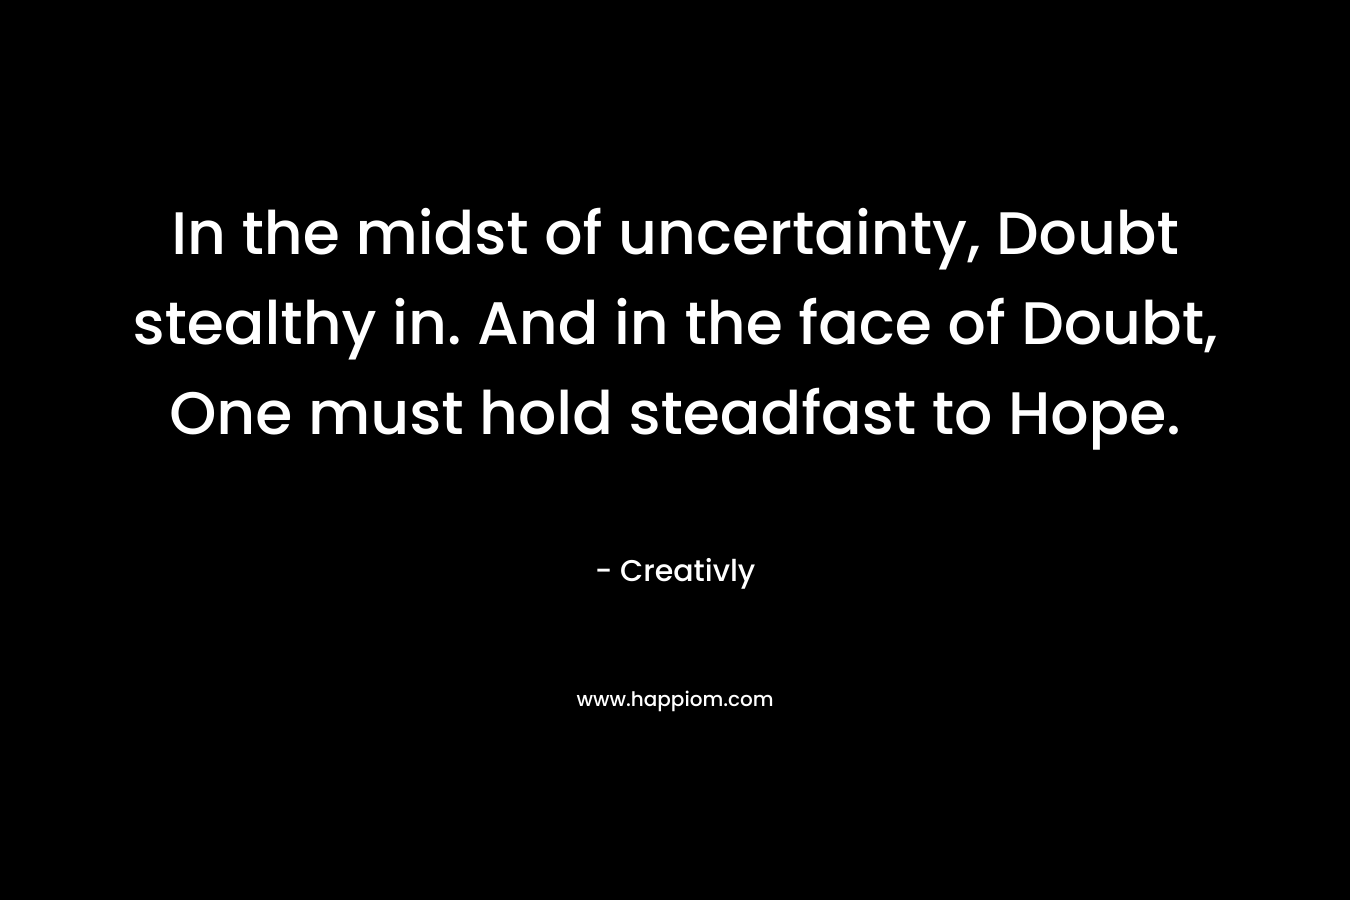 In the midst of uncertainty, Doubt stealthy in. And in the face of Doubt, One must hold steadfast to Hope. – Creativly